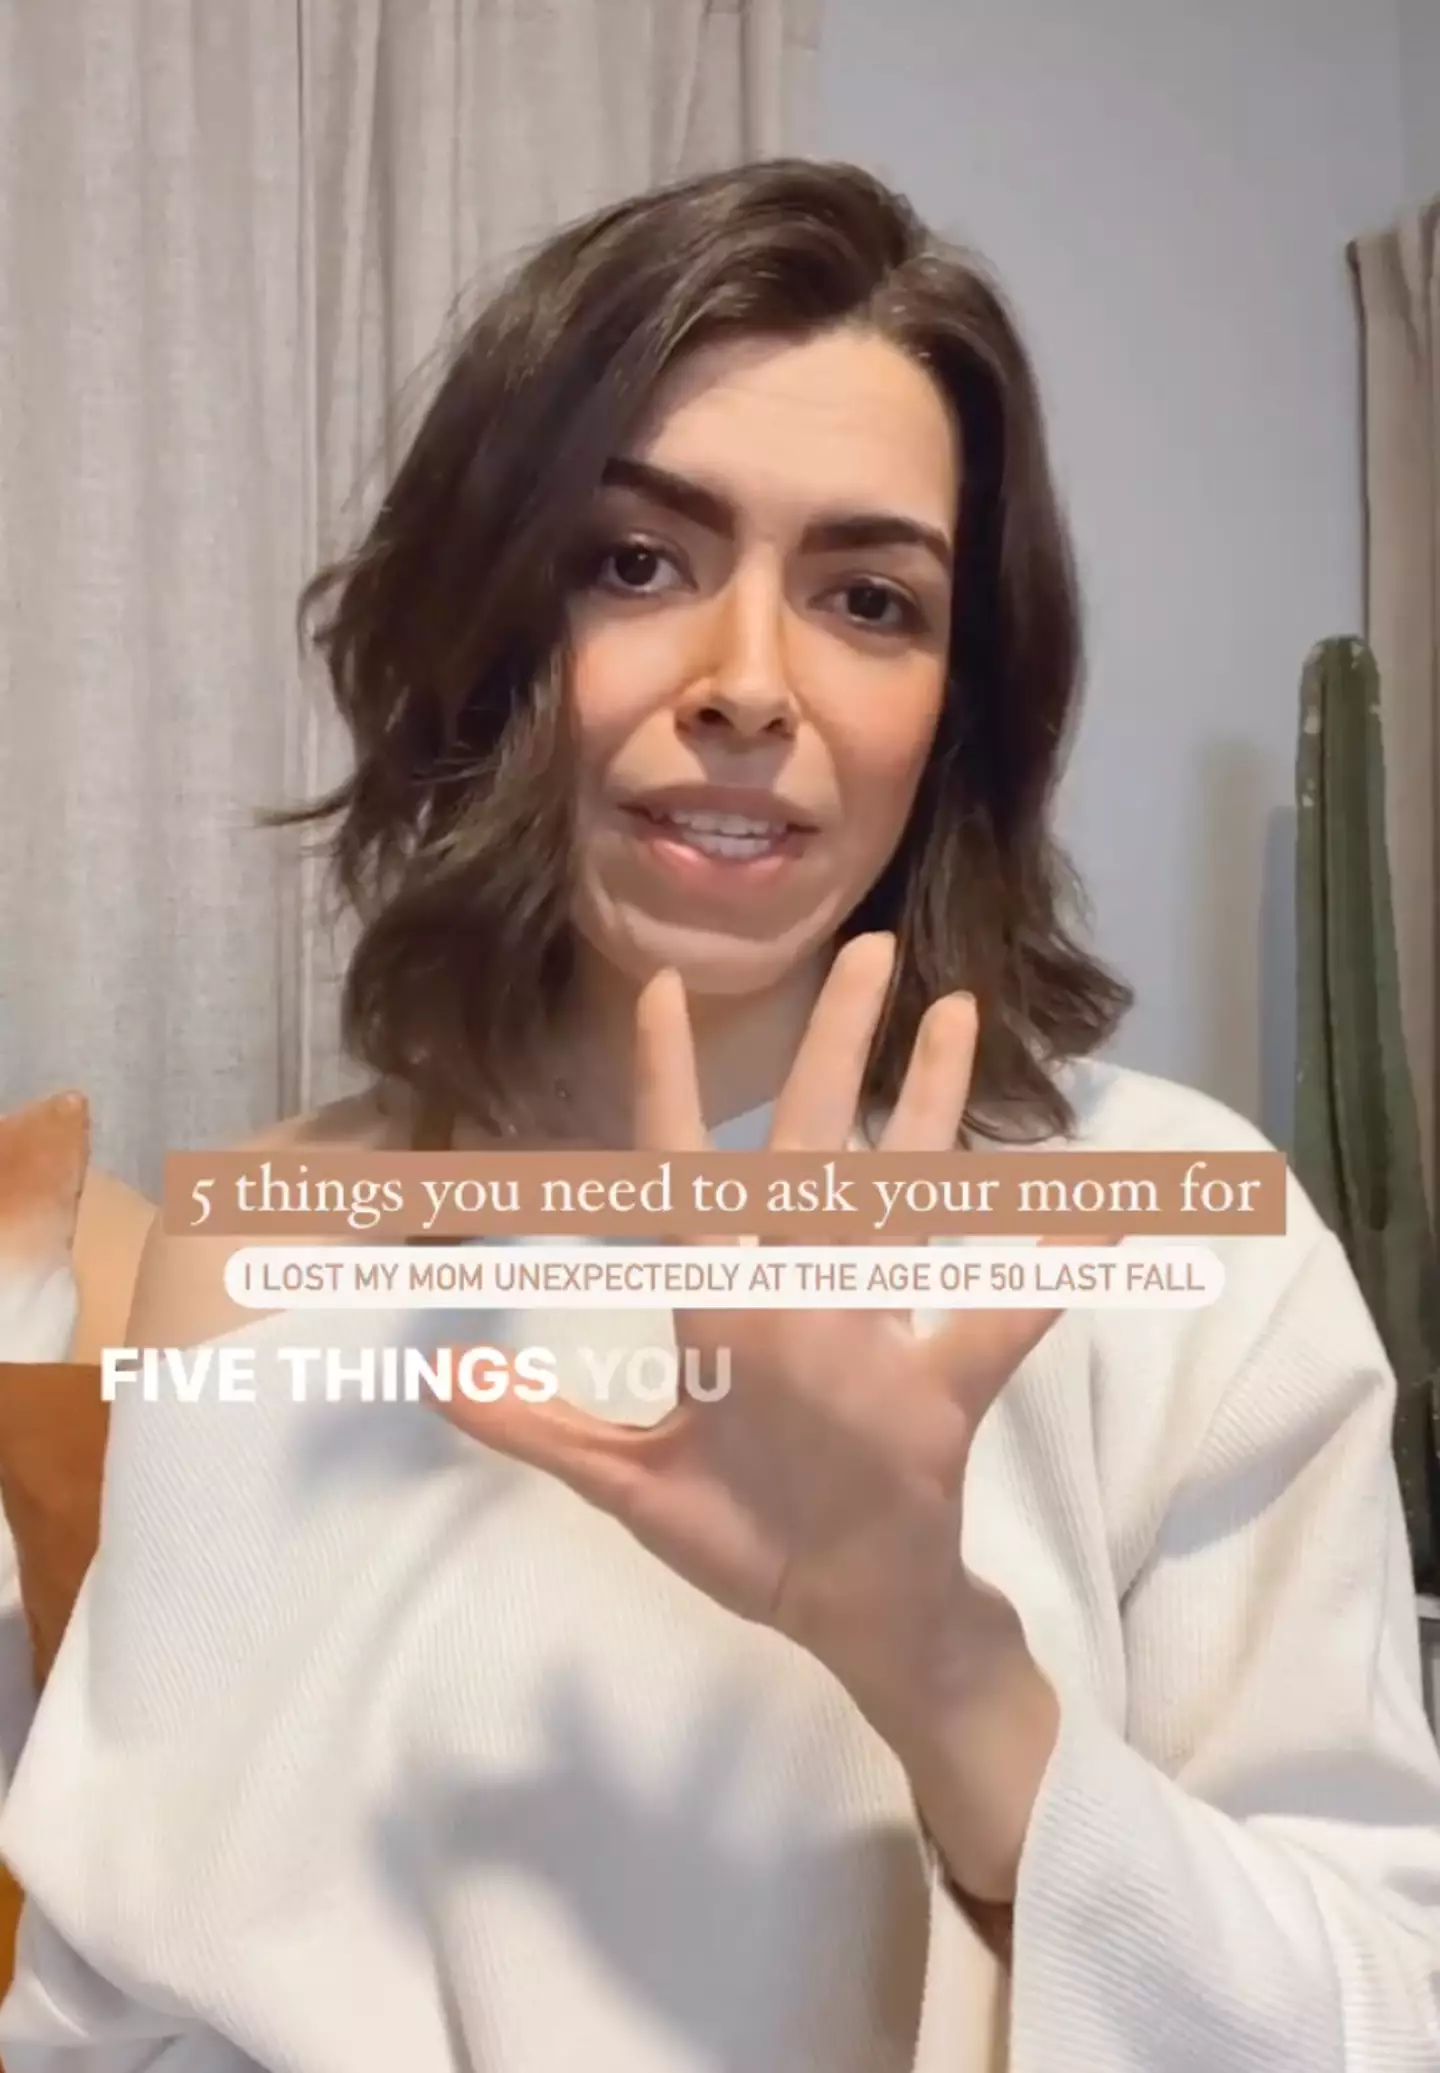 Courtney Lopez Gervais shared five things to ask your mum or dad for.